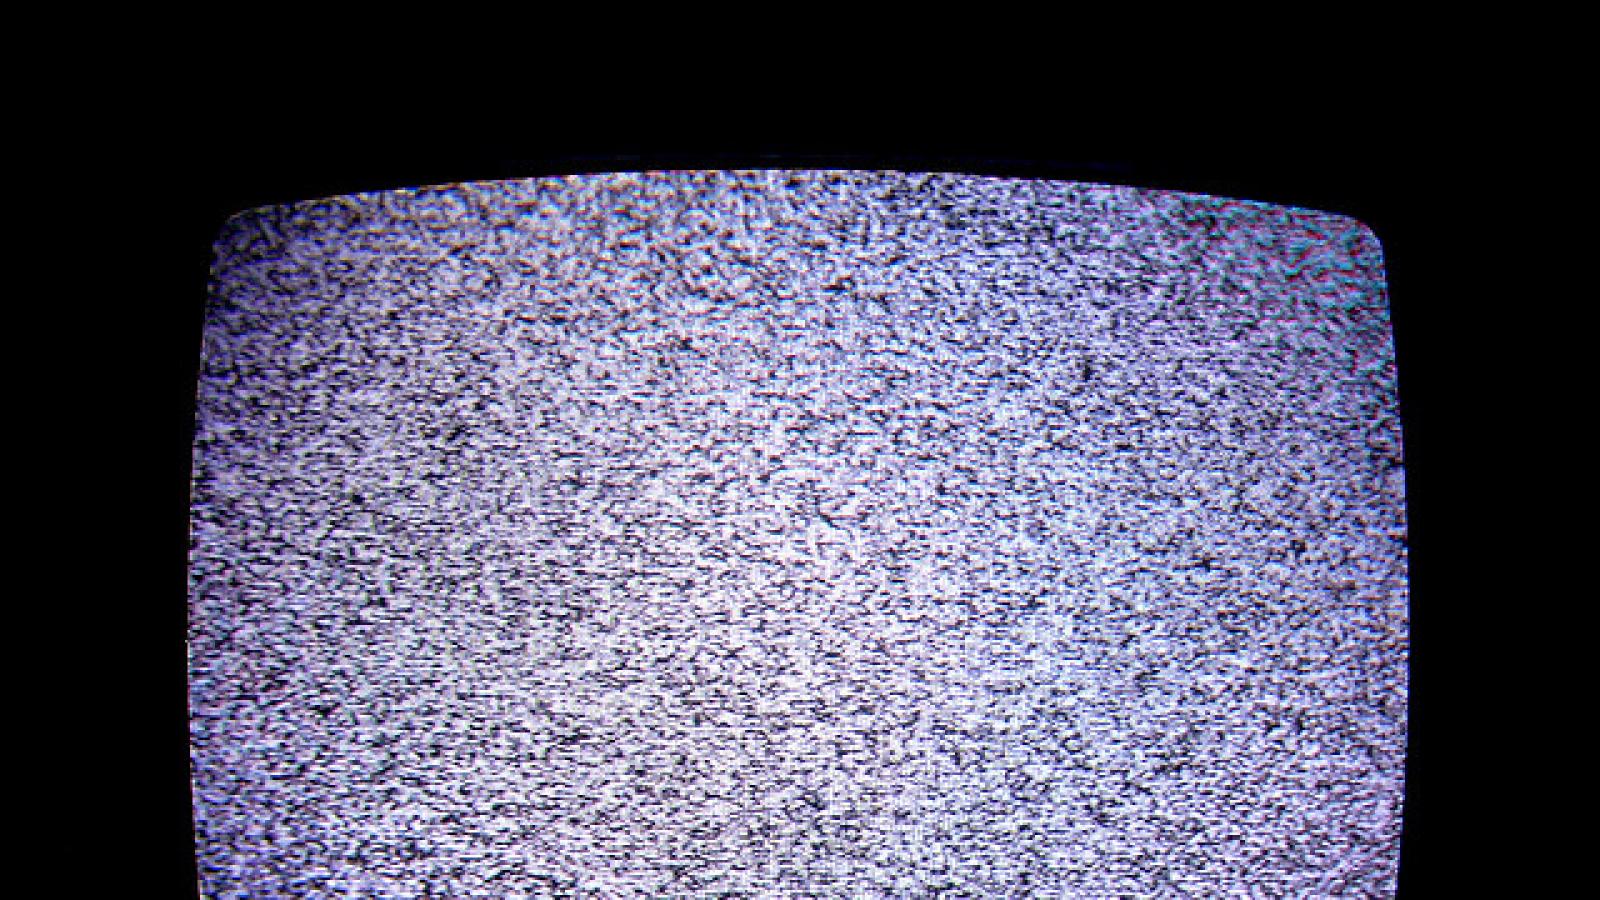 TV set with static